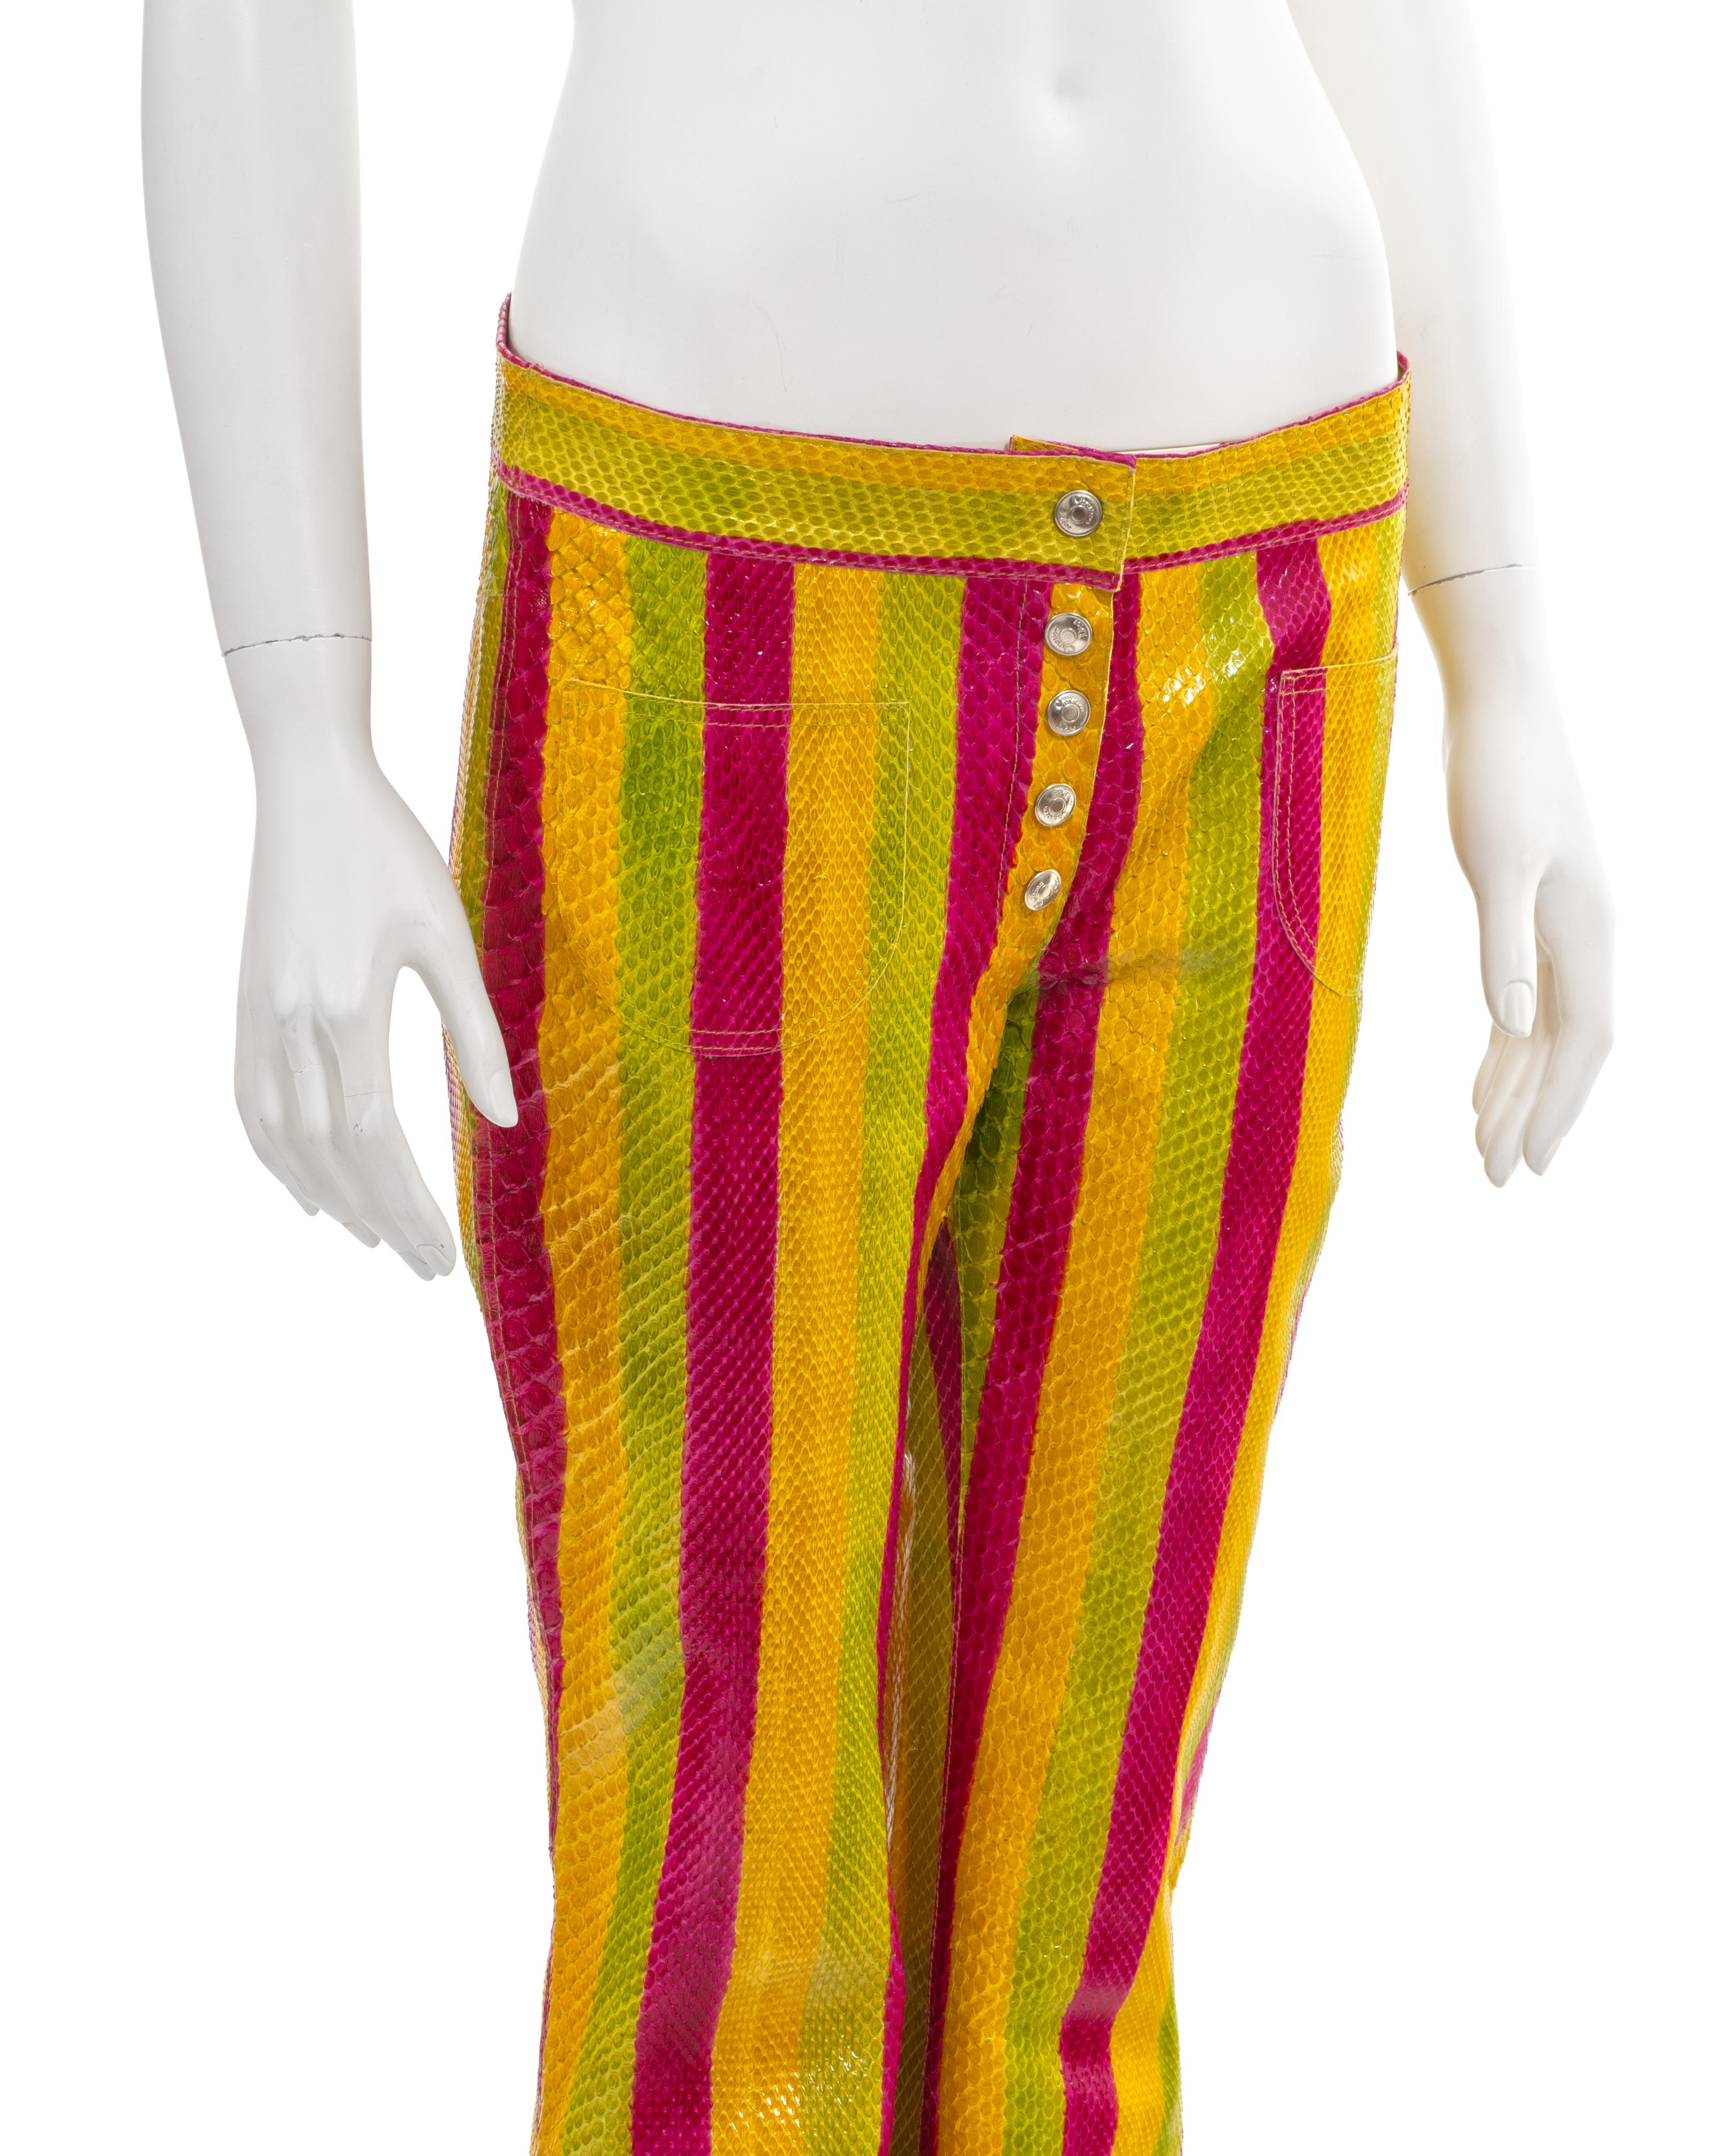 Christian Dior by John Galliano multicoloured striped python flares, ss 2002 For Sale 4